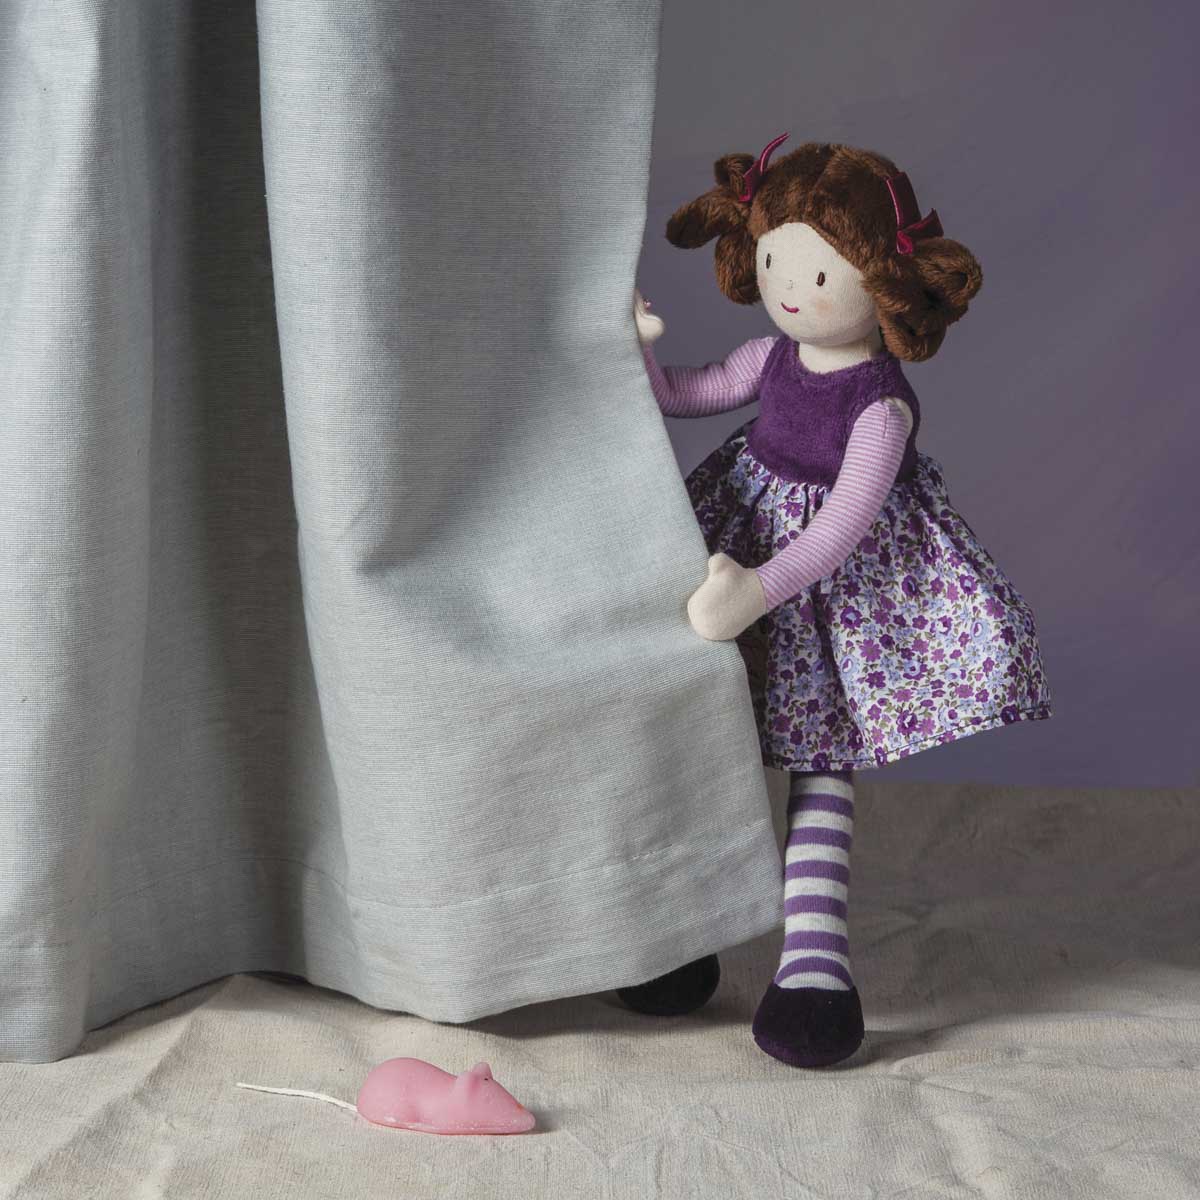 Tilly | Ragdolly Soft Toy from Ragtales Ltd